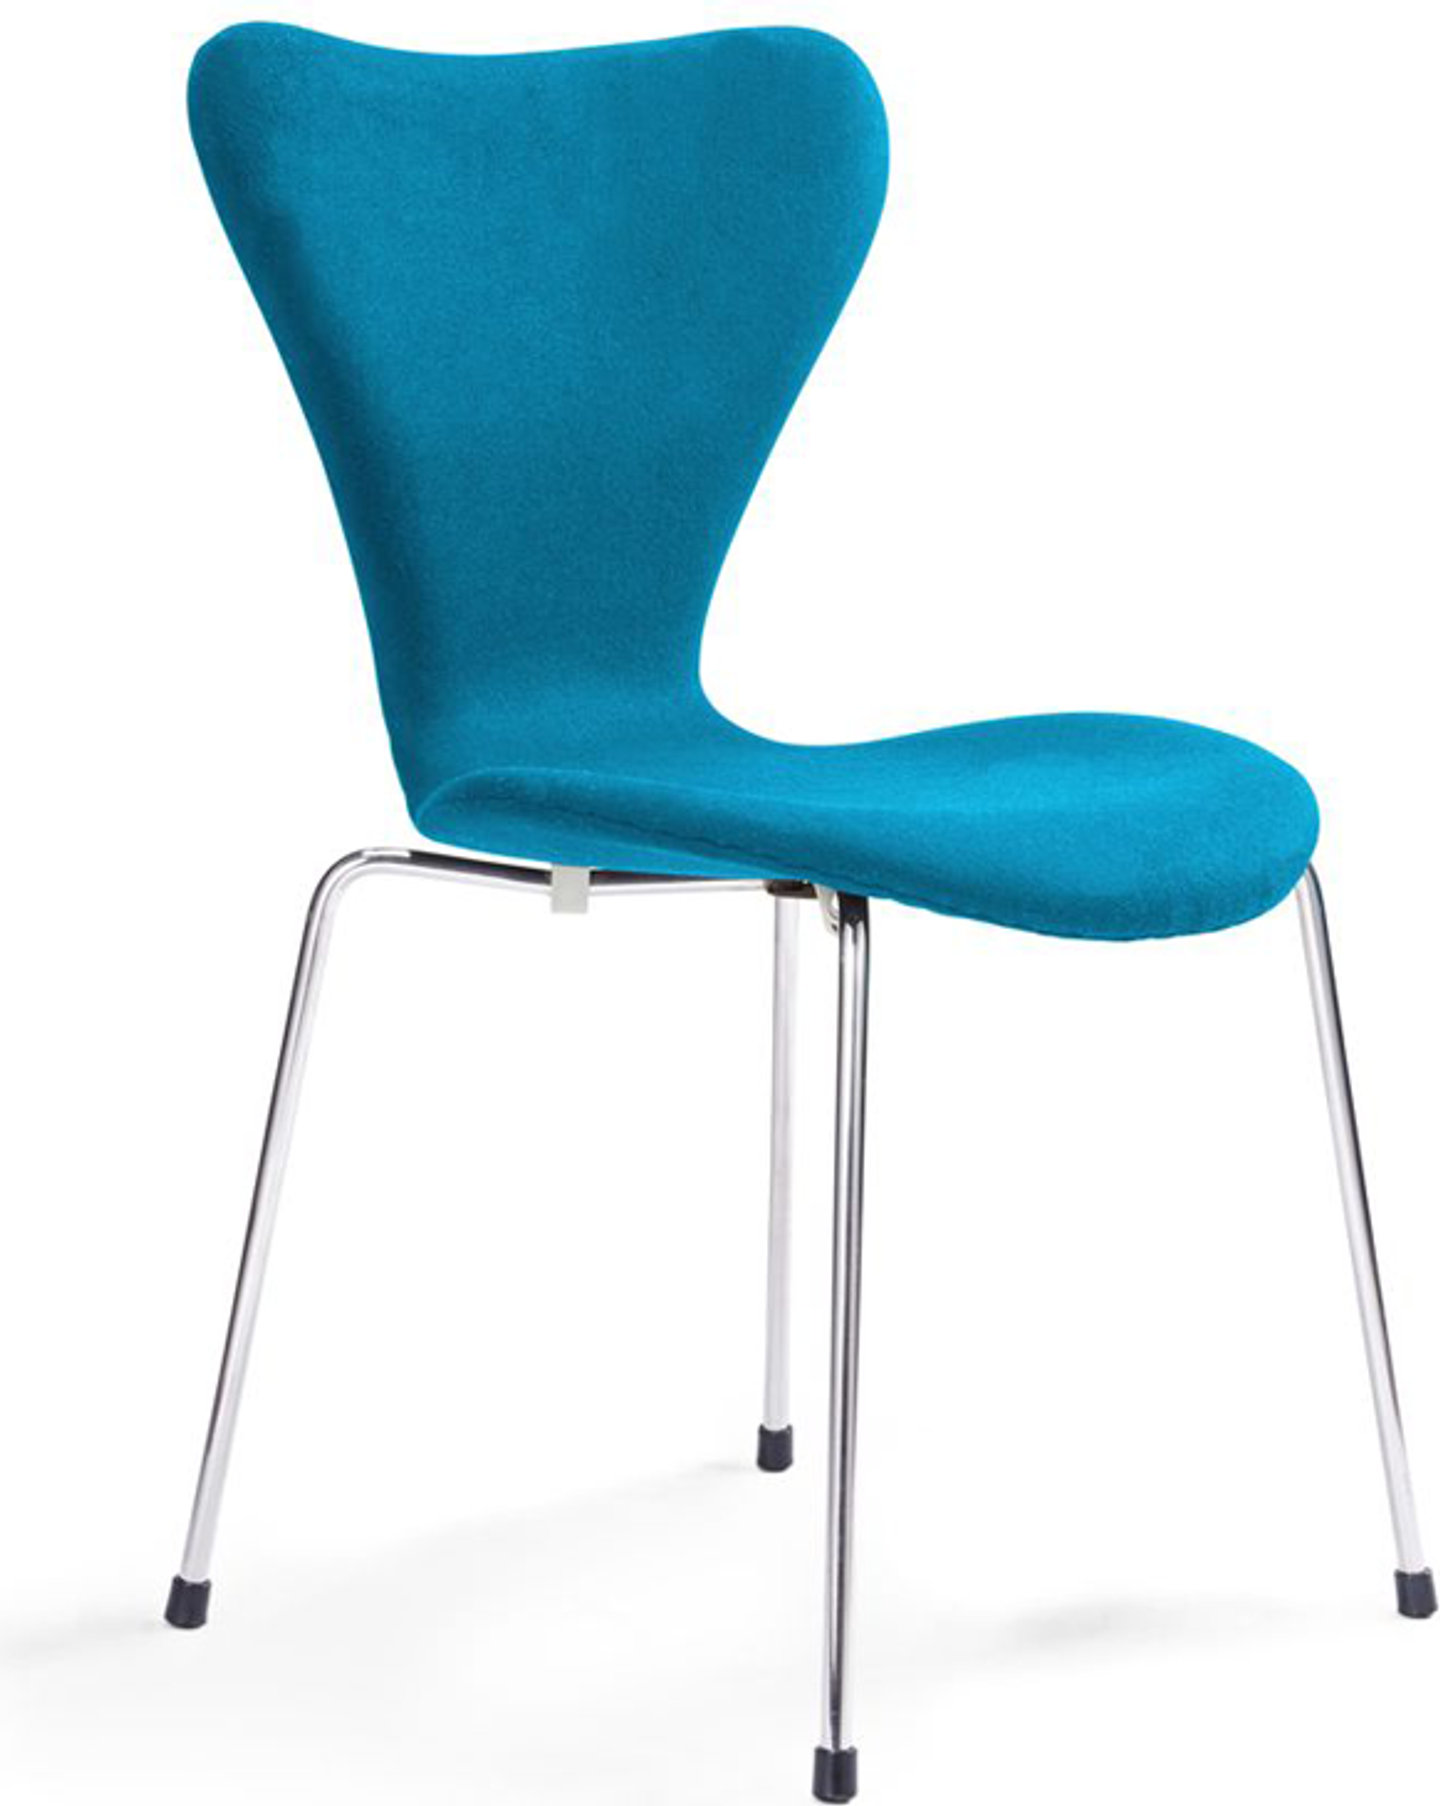 Series 7 Chair Upholstered Moroccan Blue image.